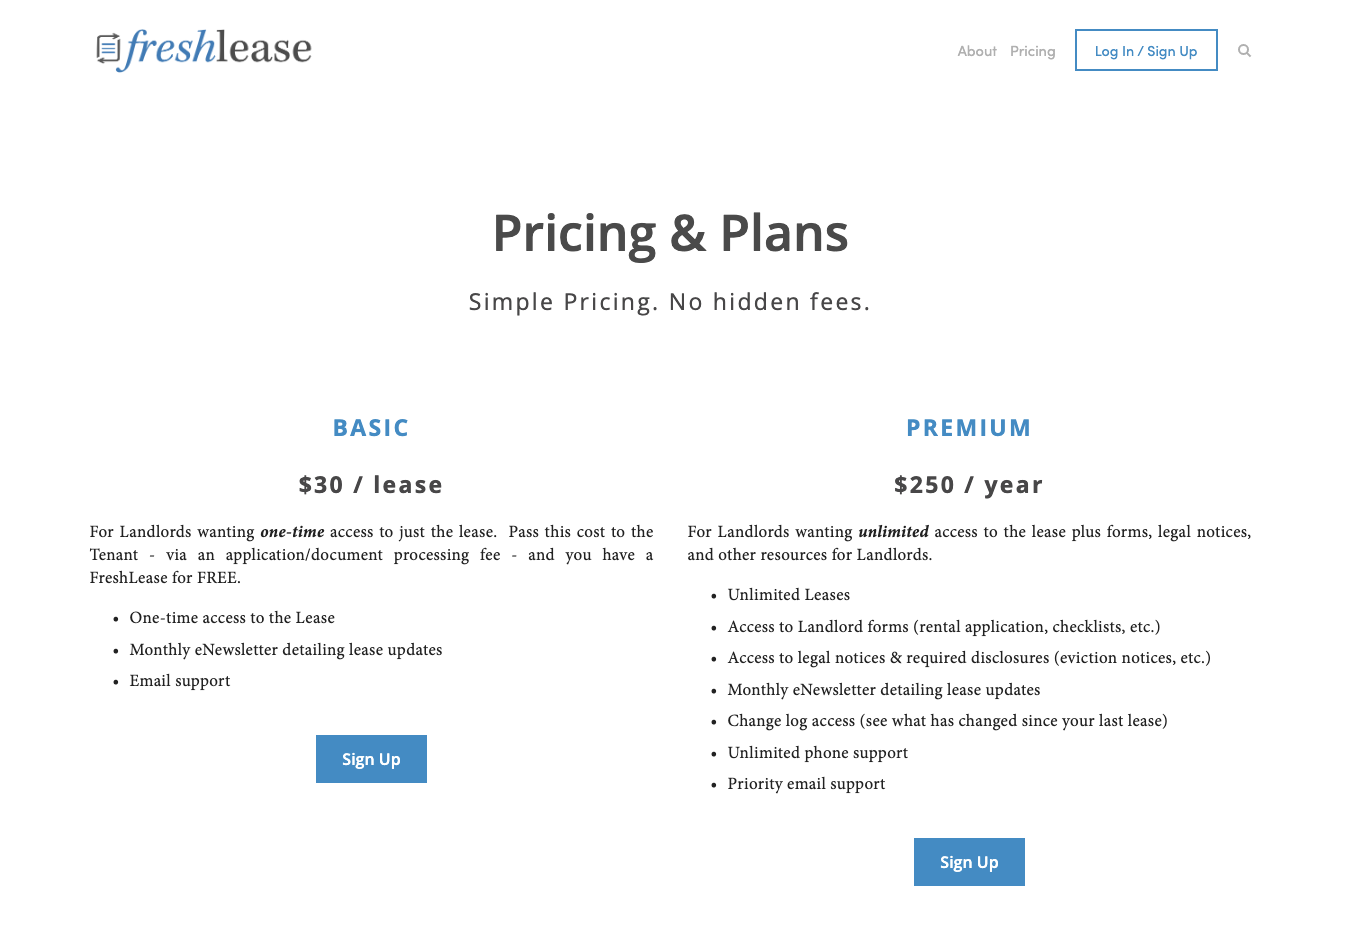 The pricing page from FreshLease.com